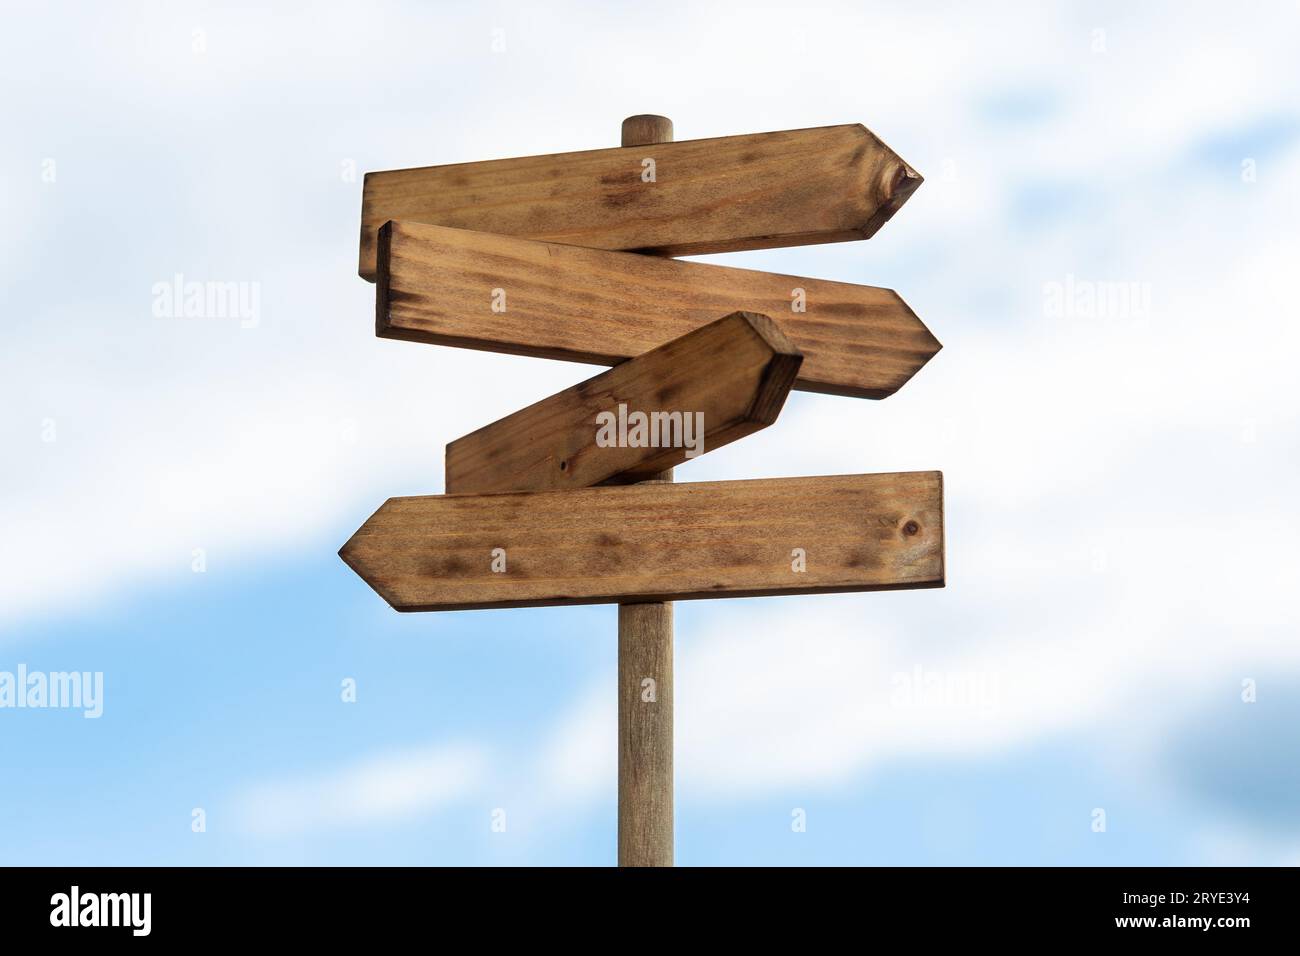 Wooden sign post isolated on blue sky with white clouds Stock Photo